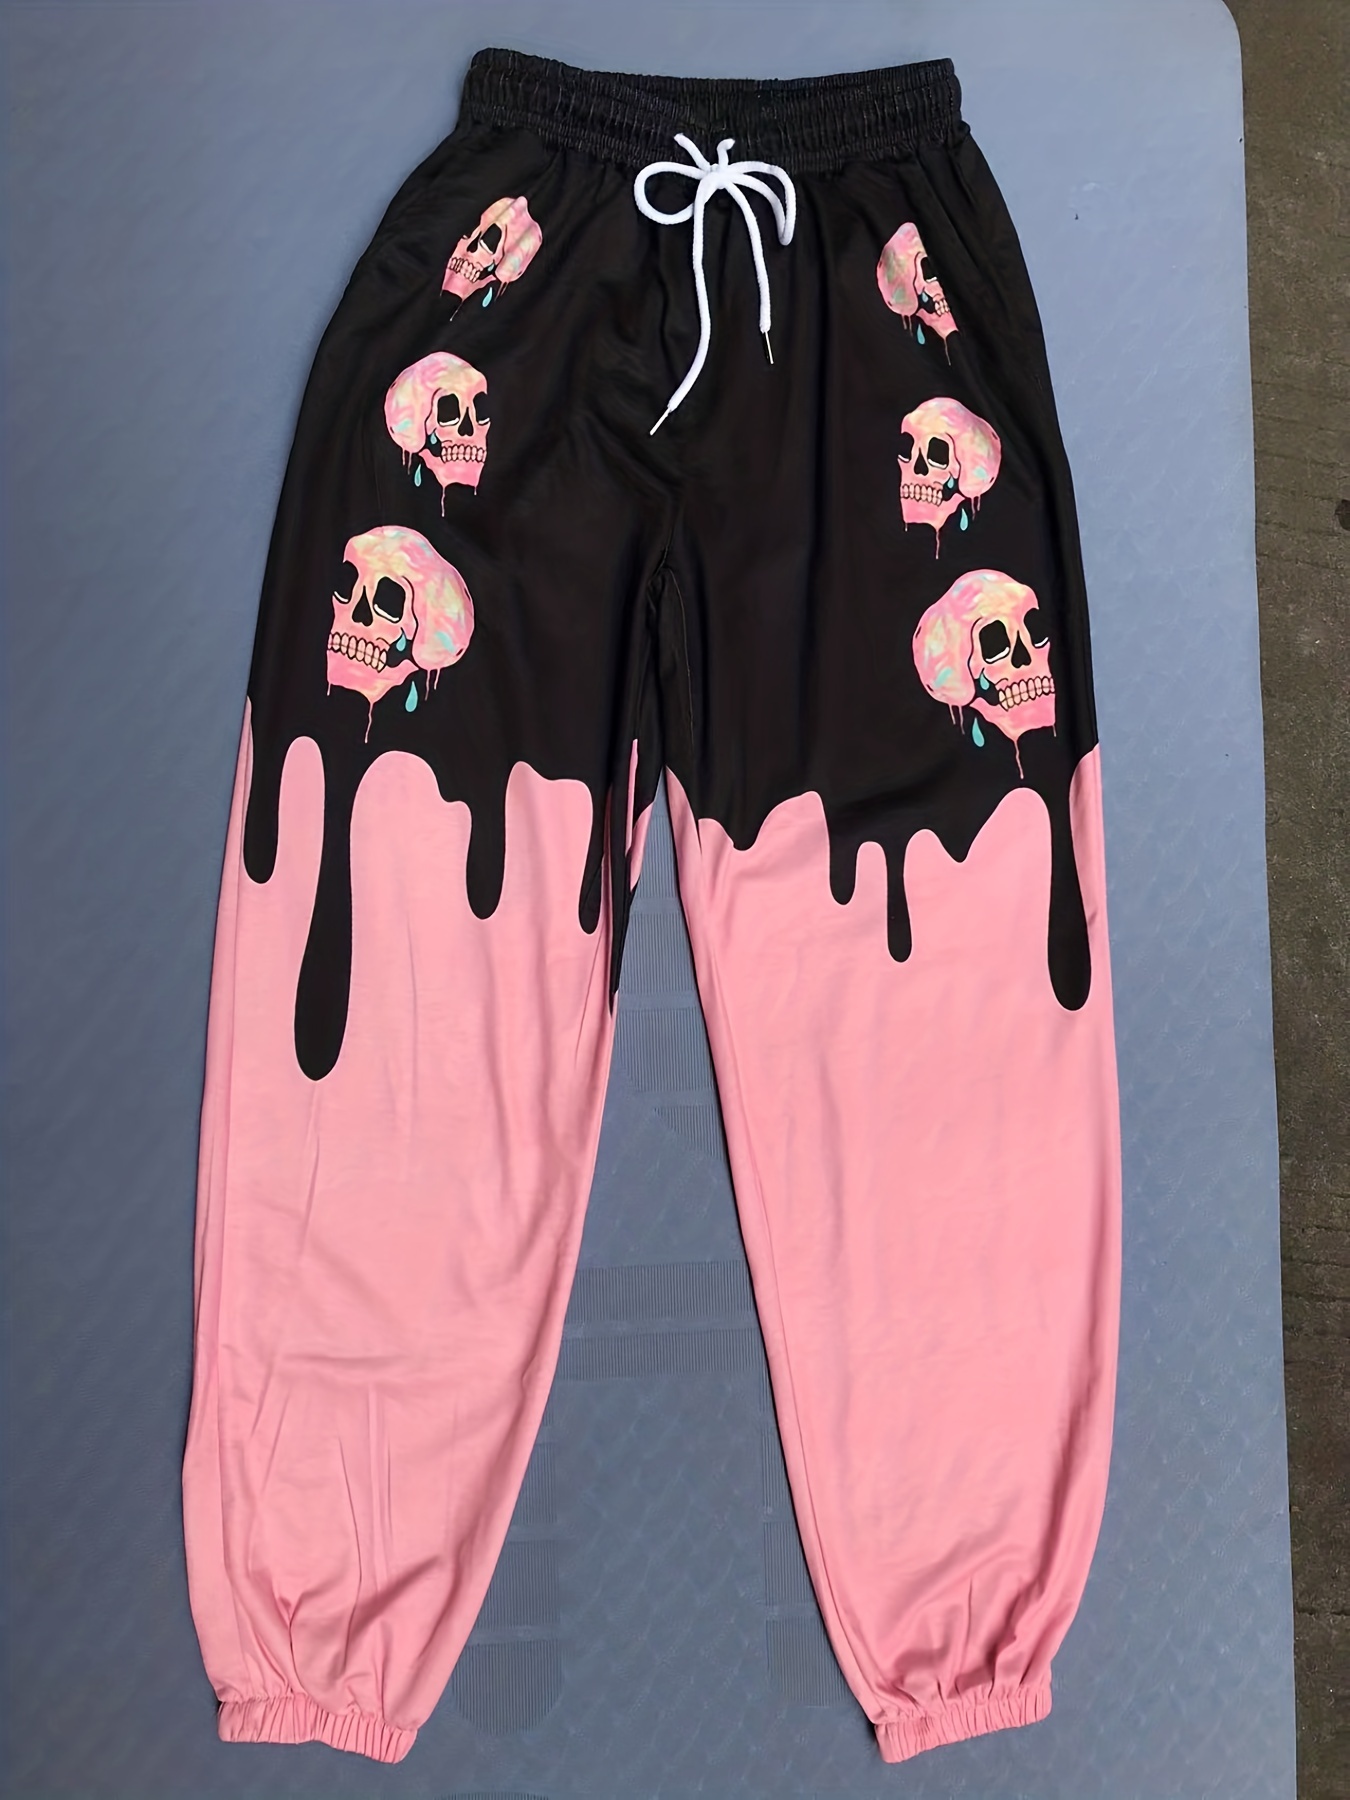  HCNTES Sweat Pants for Women Light Pink Sweatpants Halloween  Sweatpants for Women High Waisted Ghost Graphic Print Cute Joggers Teen  Girls Drawstring Trendy Sweatpants : Clothing, Shoes & Jewelry